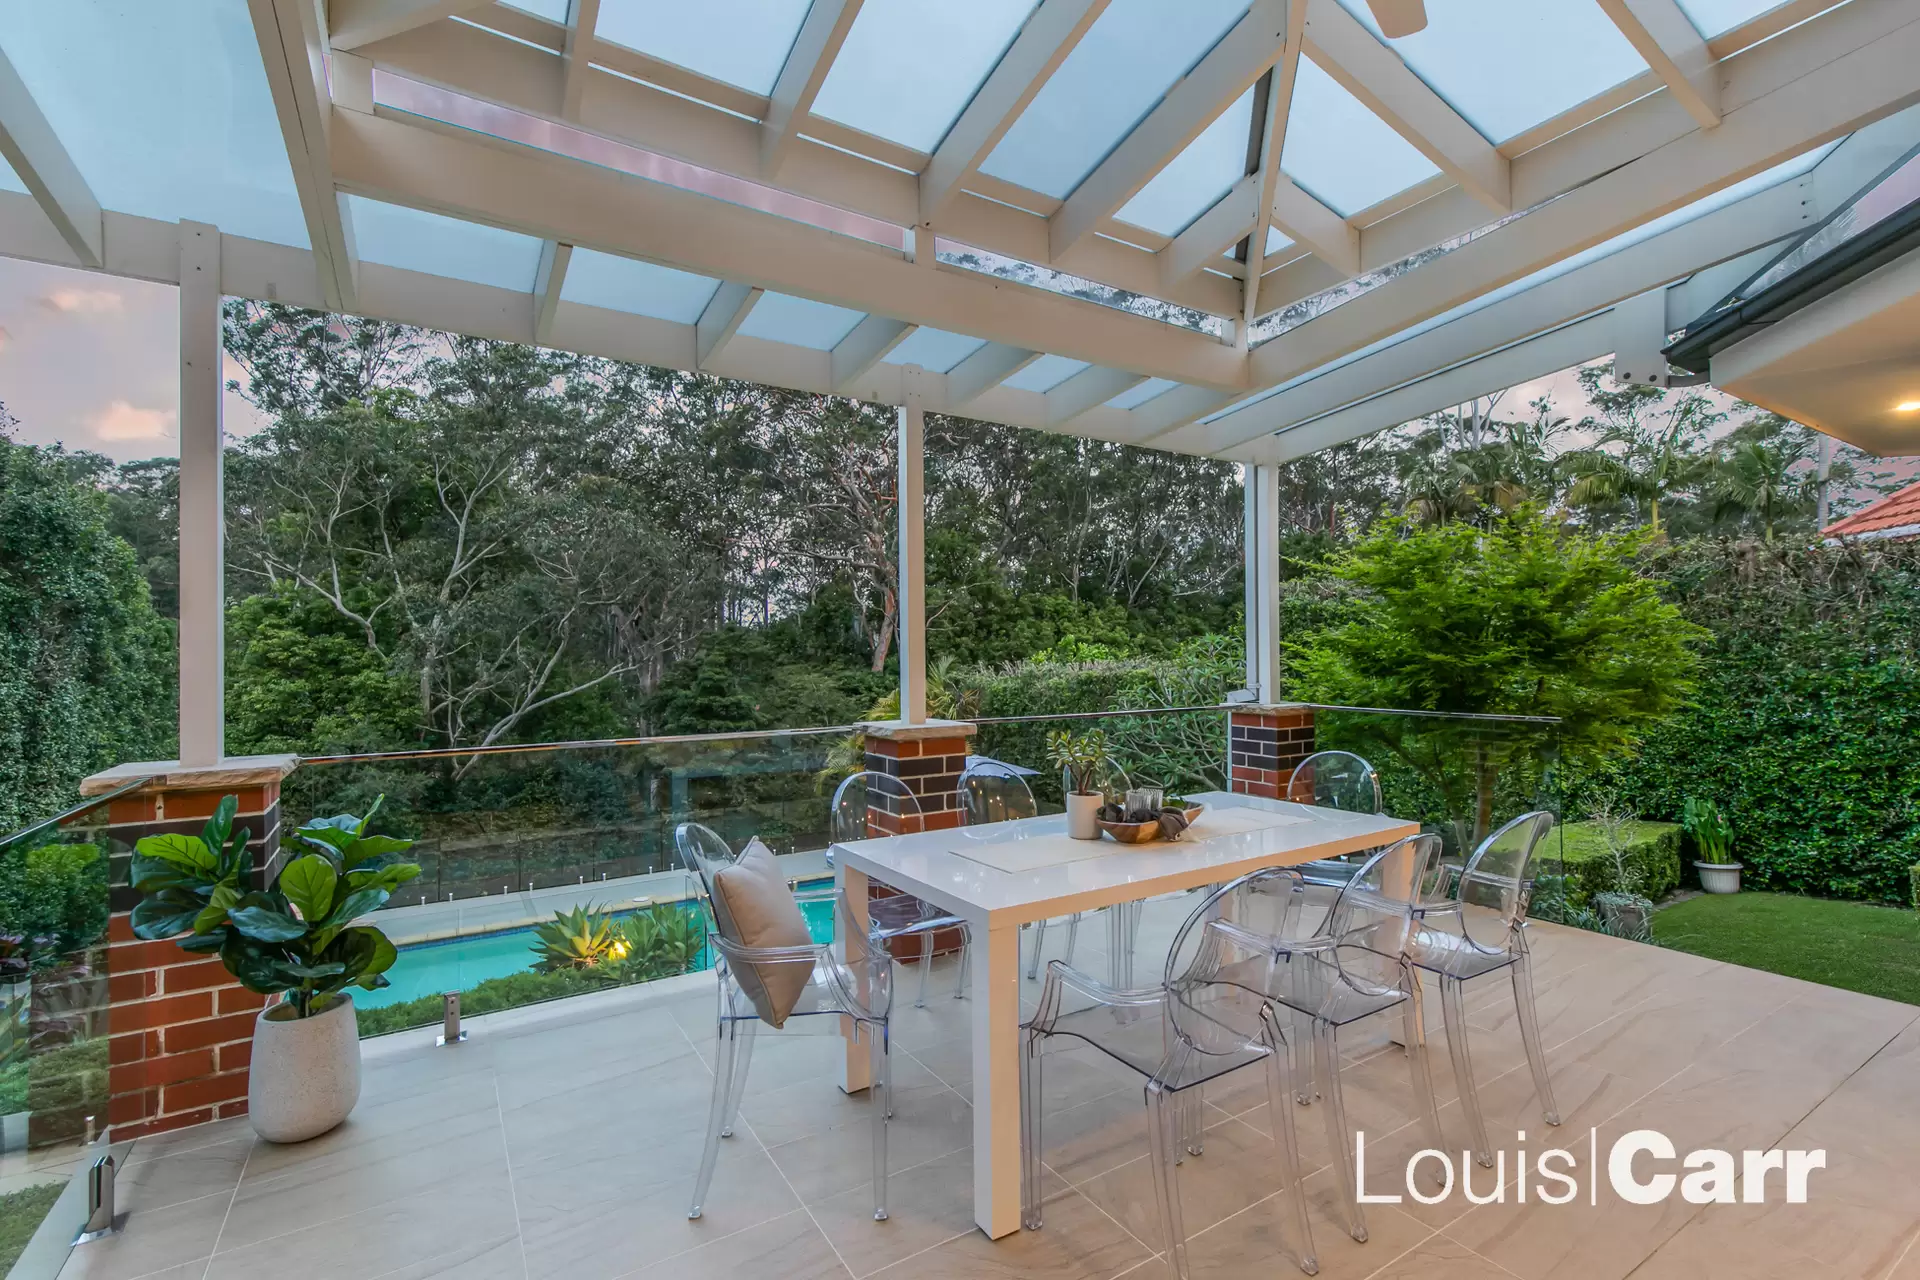 Photo #13: 2 Rodney Place, West Pennant Hills - Sold by Louis Carr Real Estate